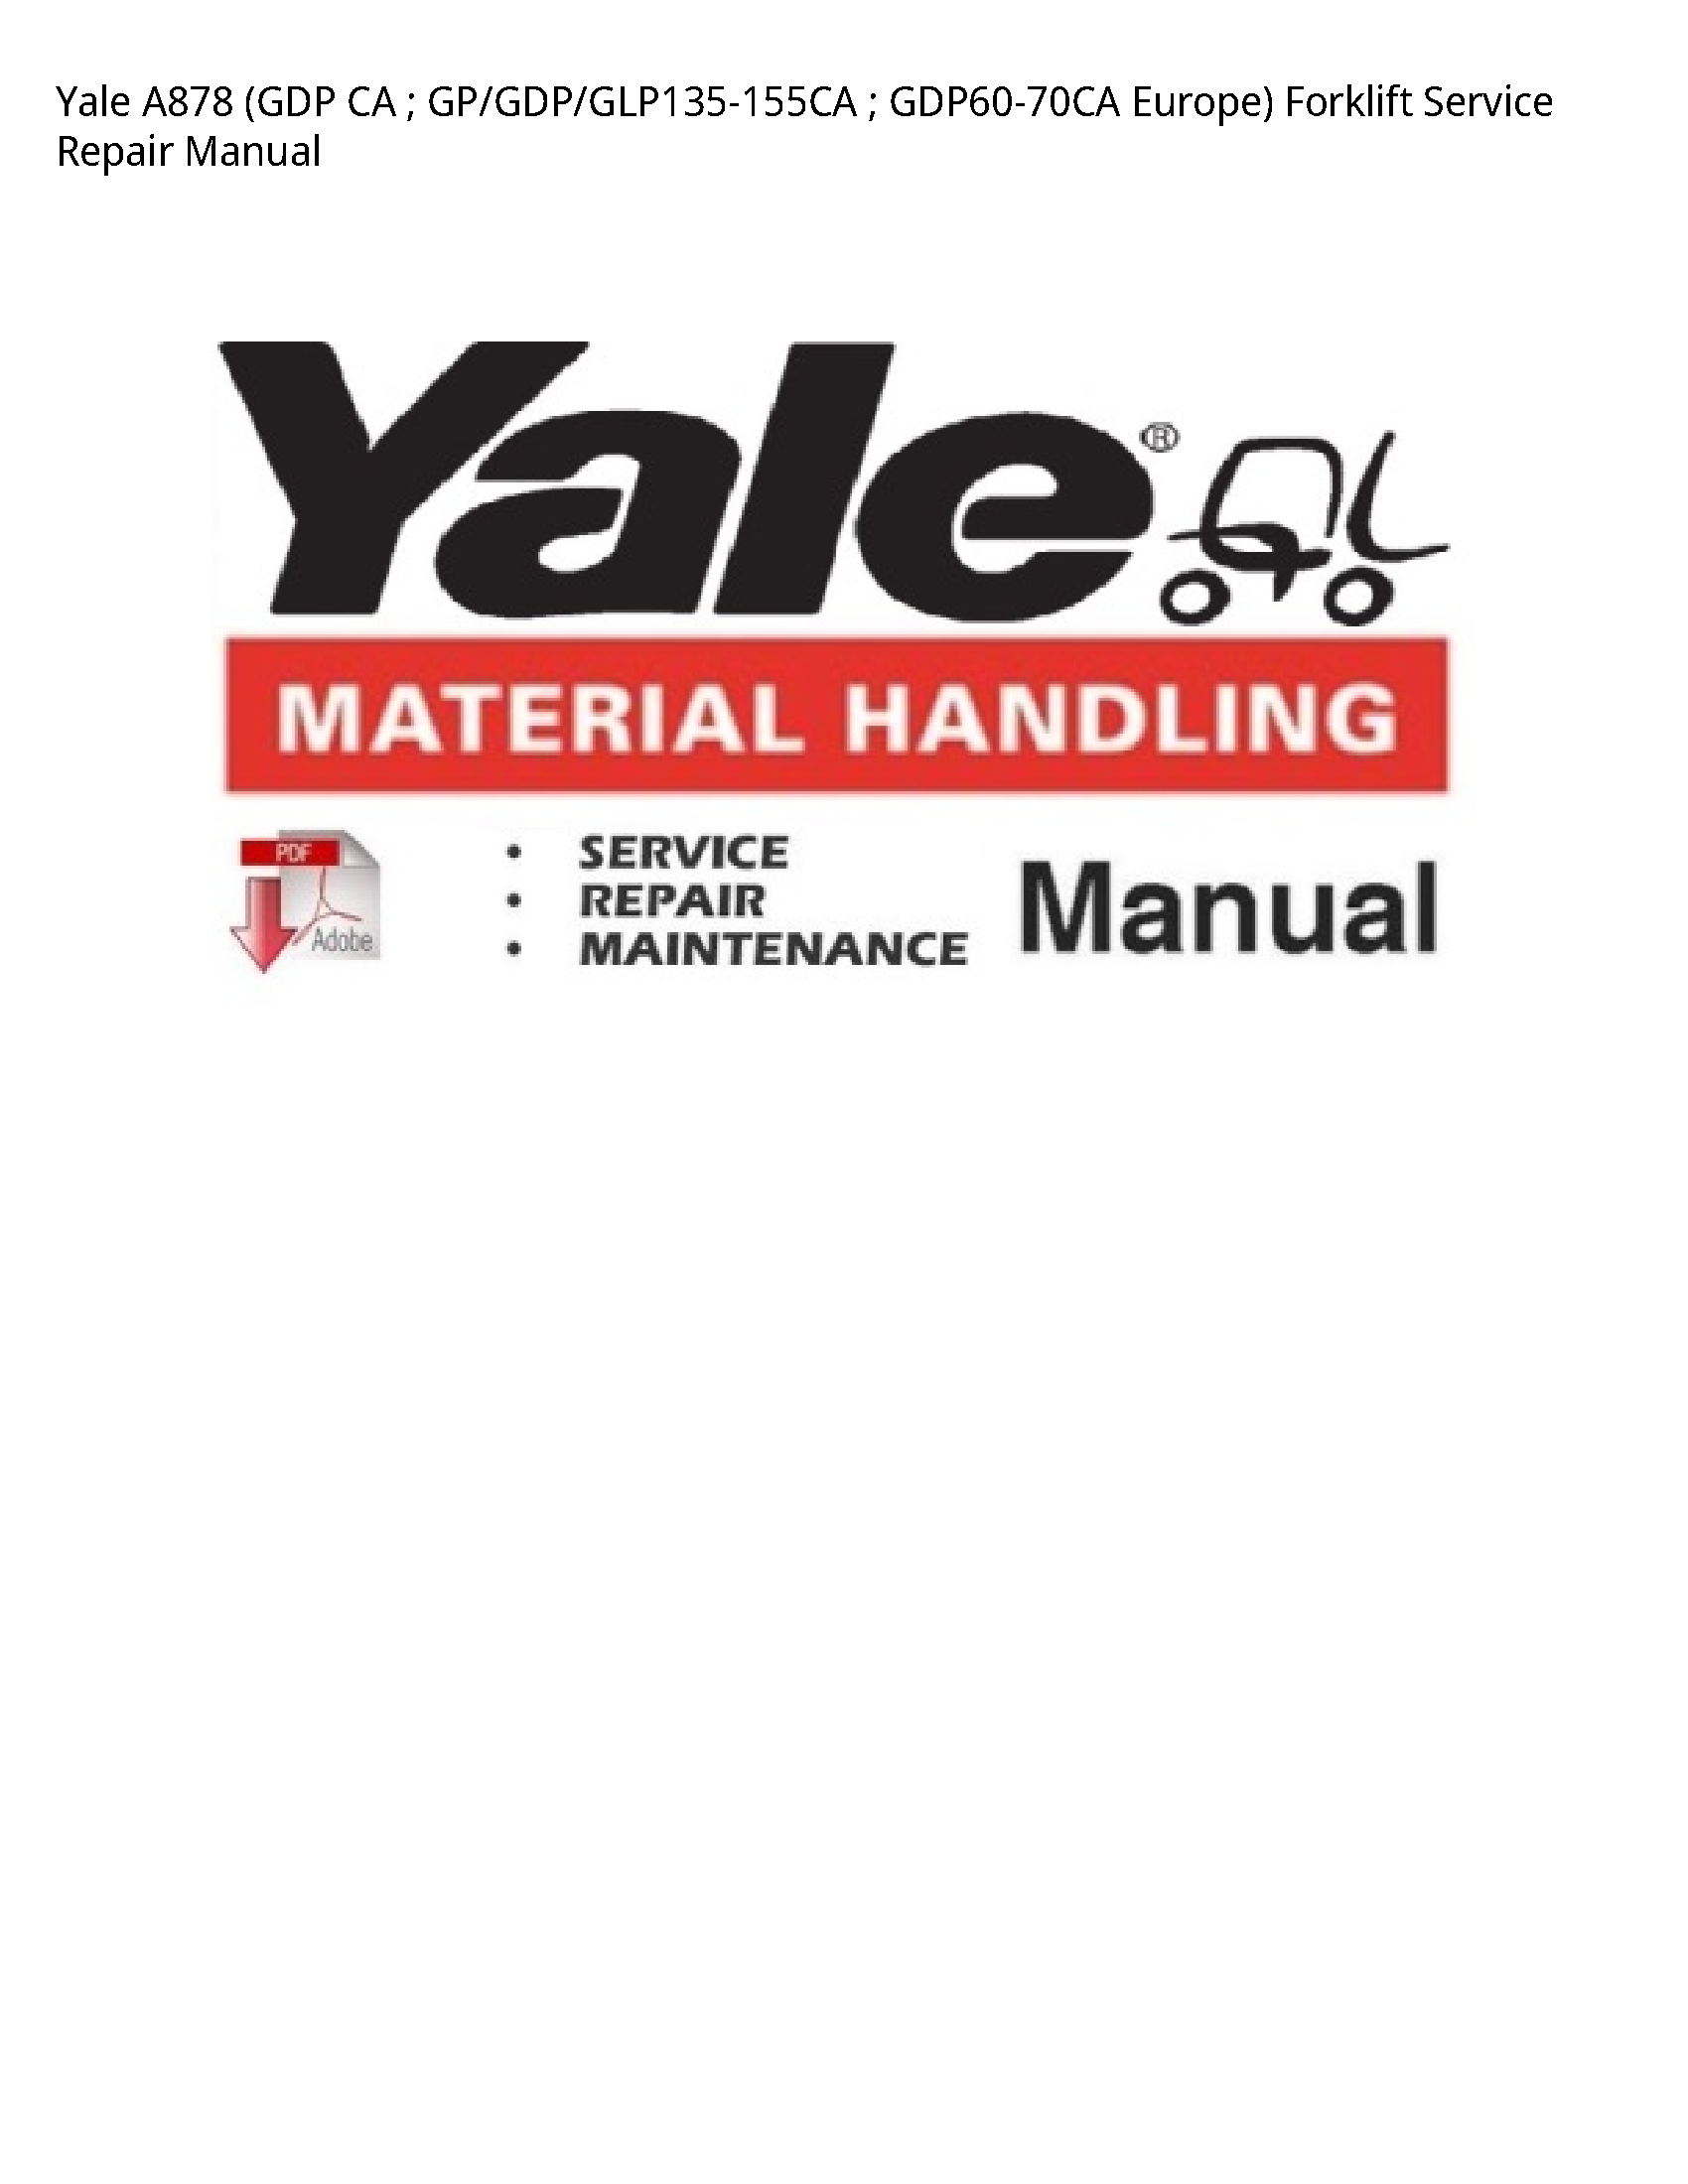 Yale A878 (GDP CA Europe) Forklift manual